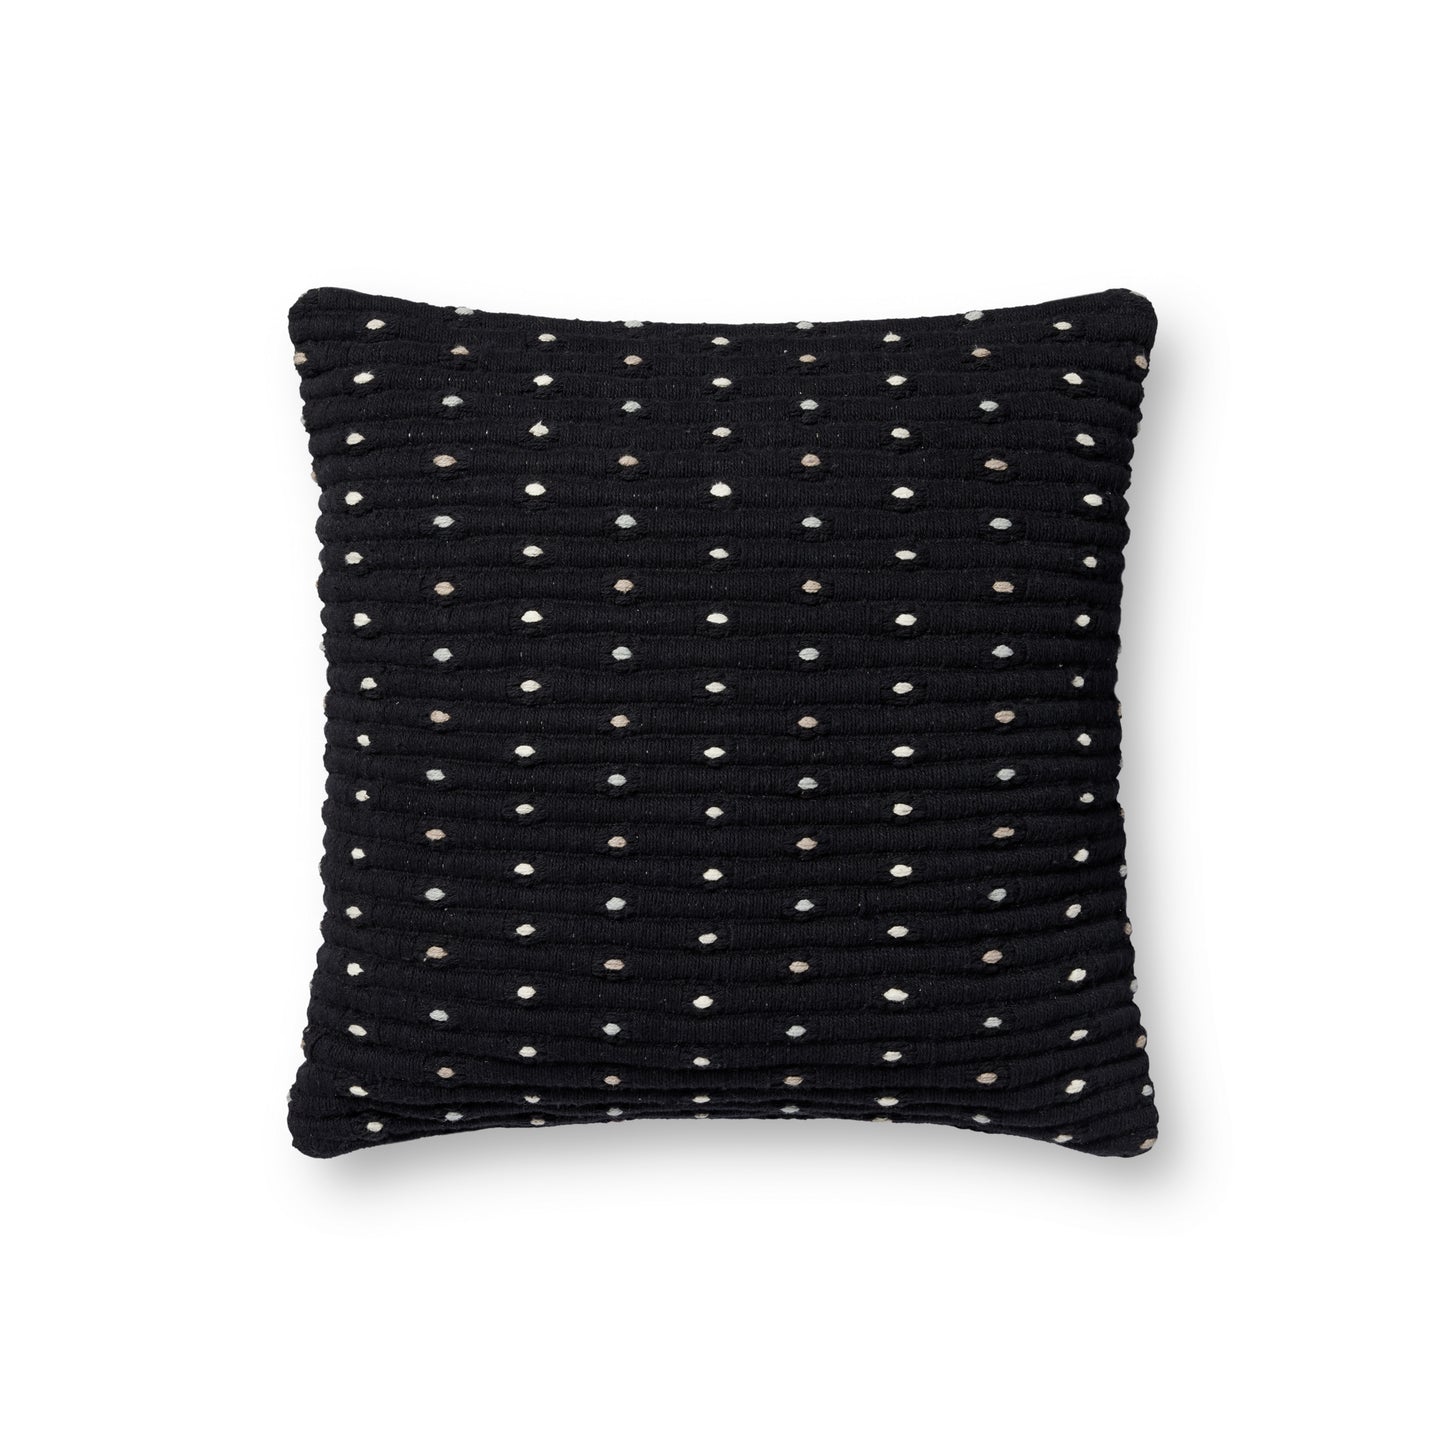 Photo of a pillow;  PLL0118 Black 18'' x 18'' Cover w/Poly Pillow